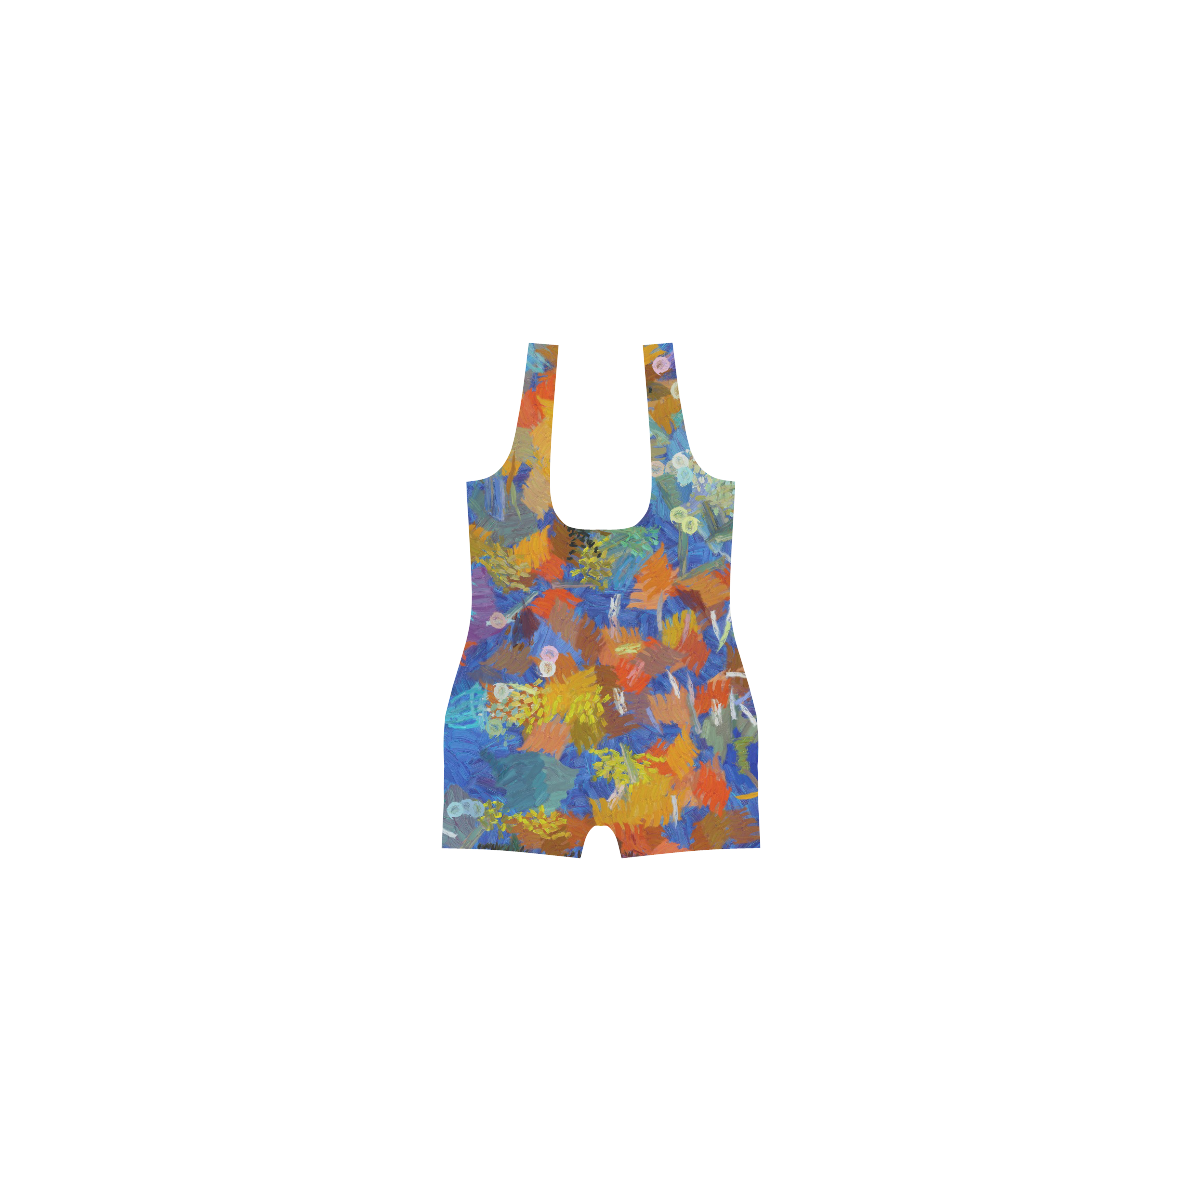 Colorful paint strokes Classic One Piece Swimwear (Model S03)